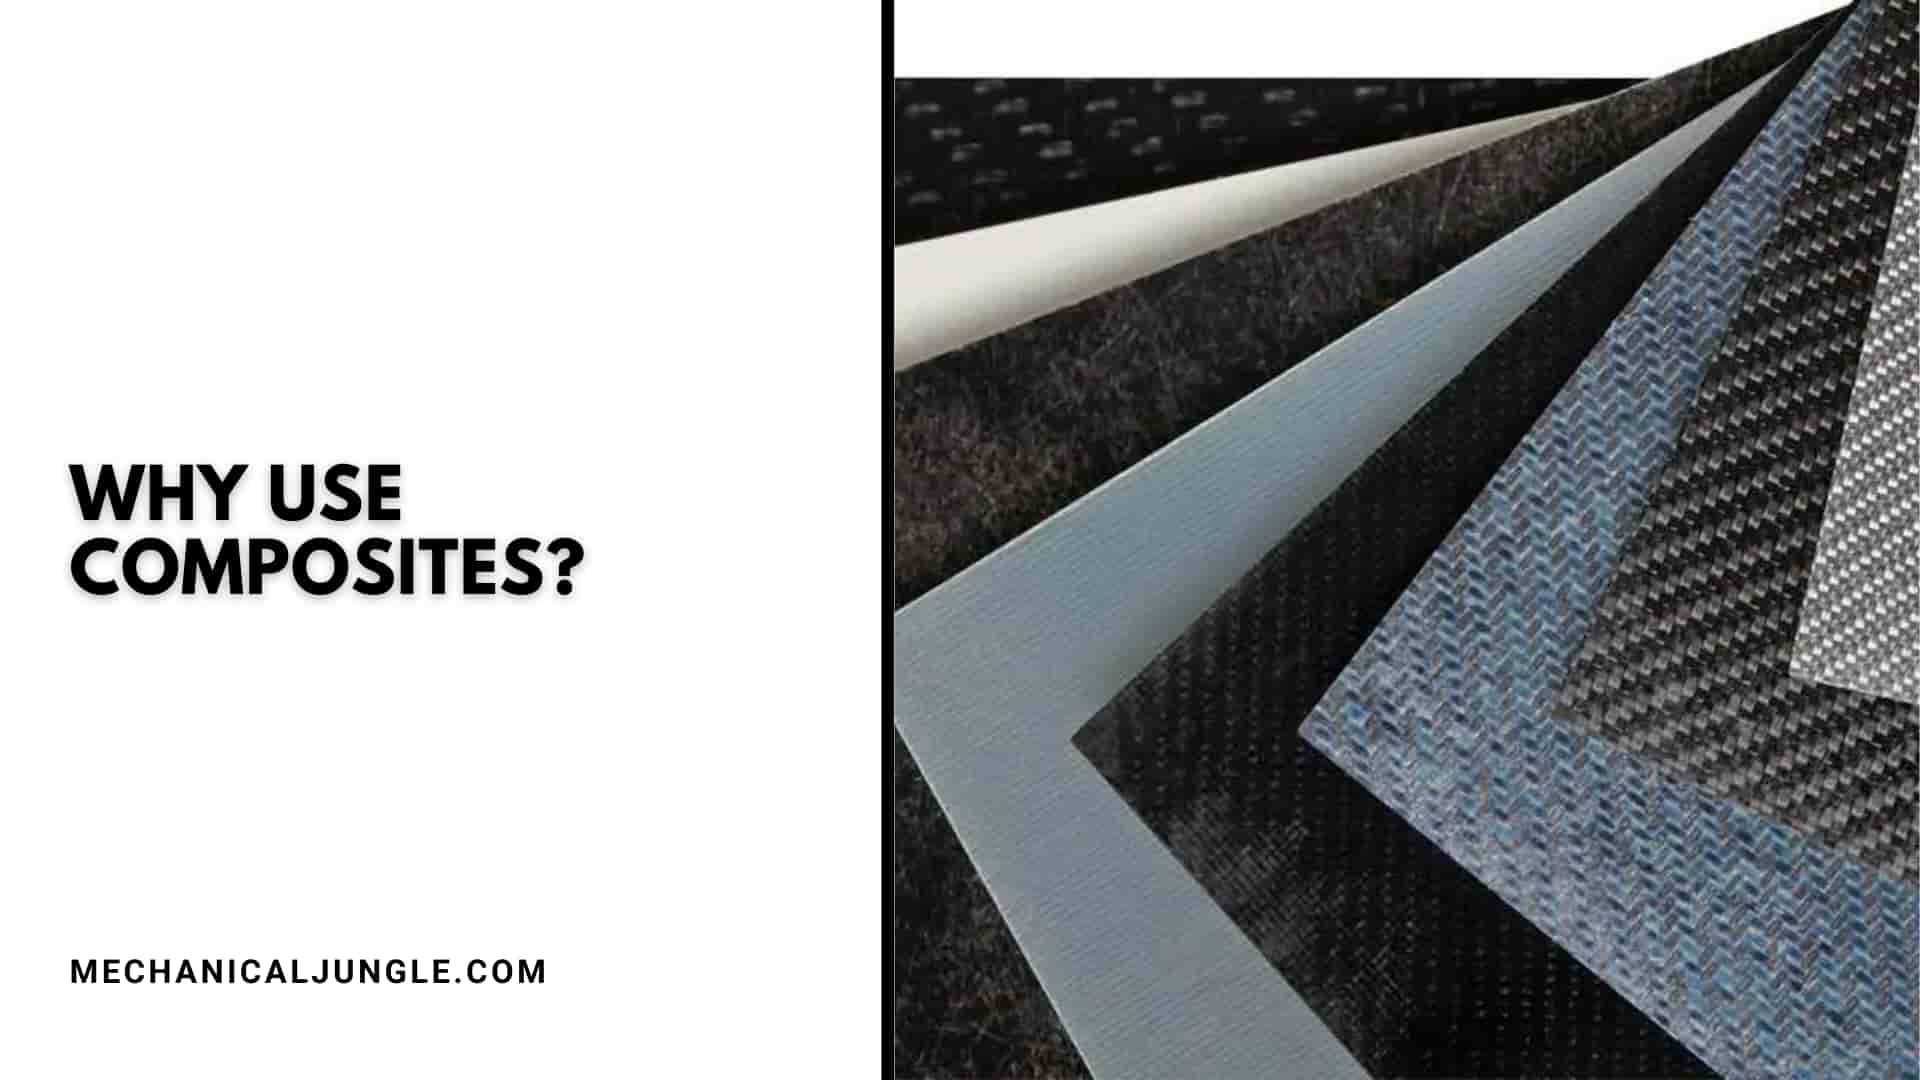 Why Use Composites?